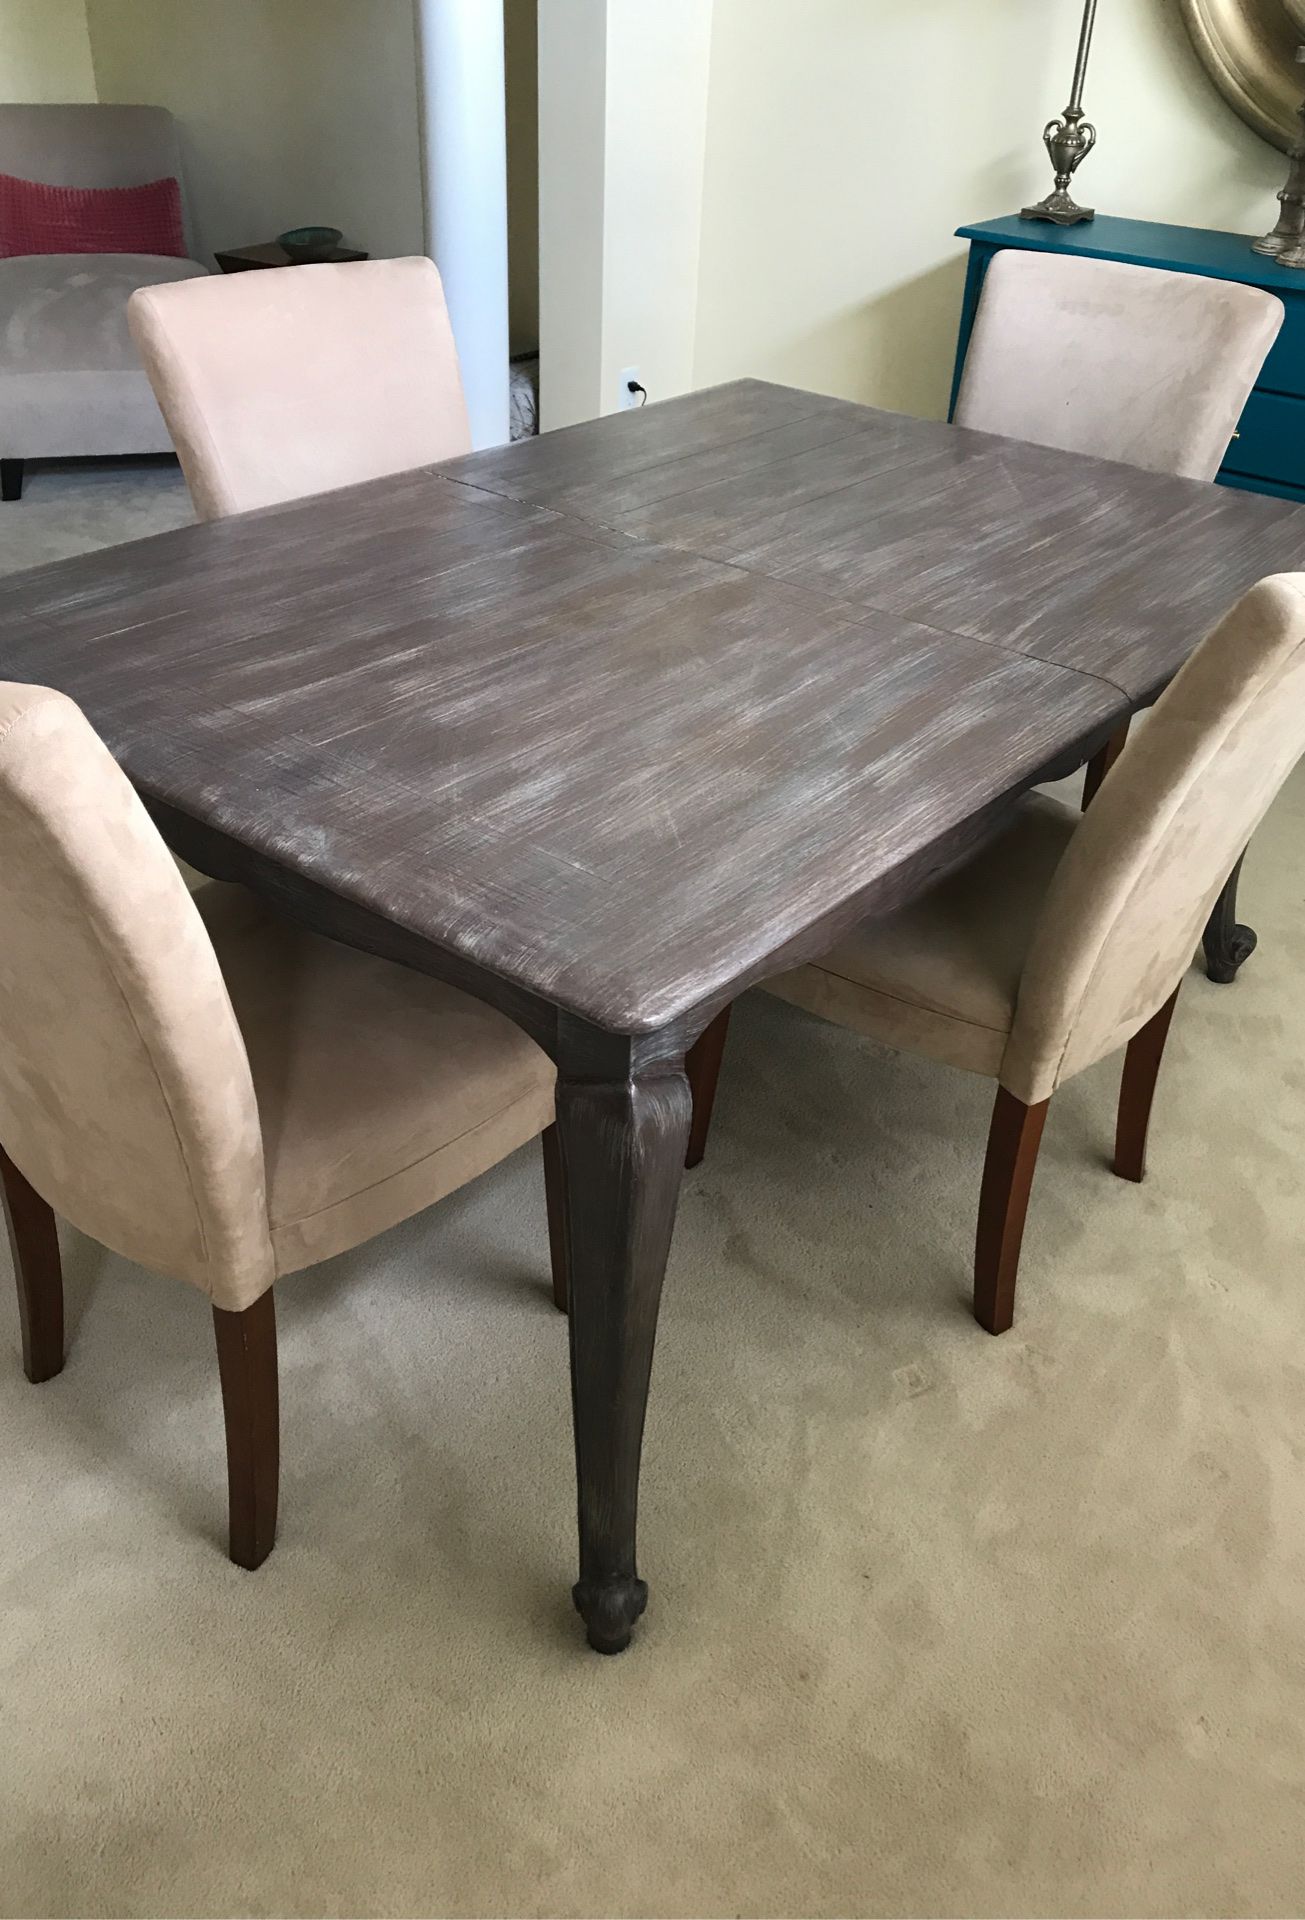 Custom painted dining table with leaf TABLE ONLY